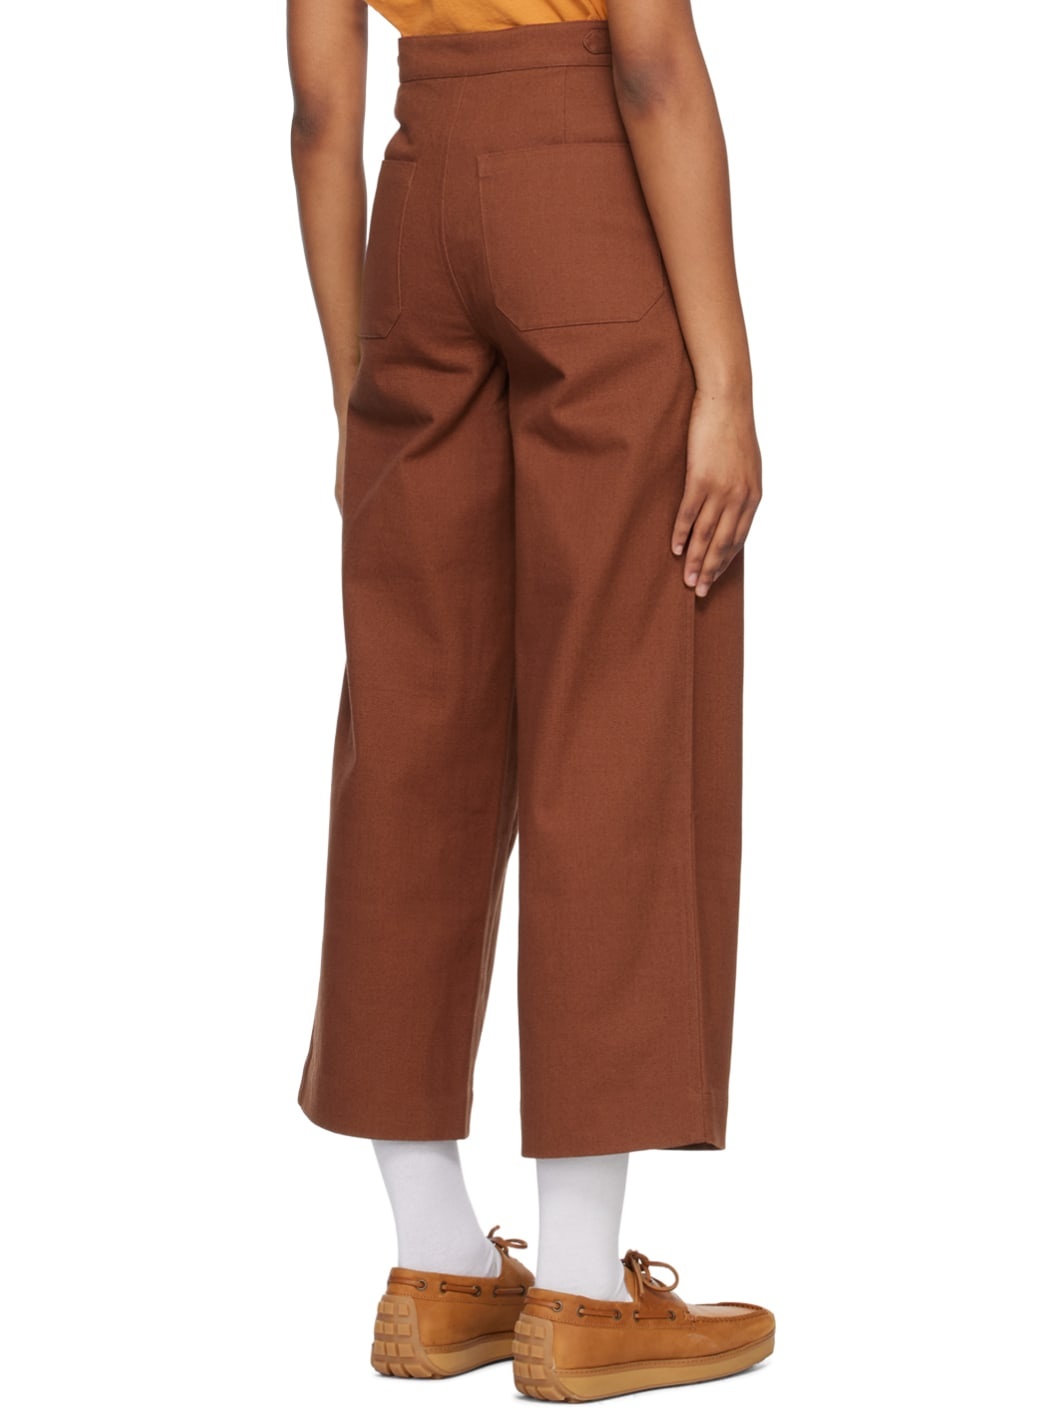 Brown Snap Trousers - 3